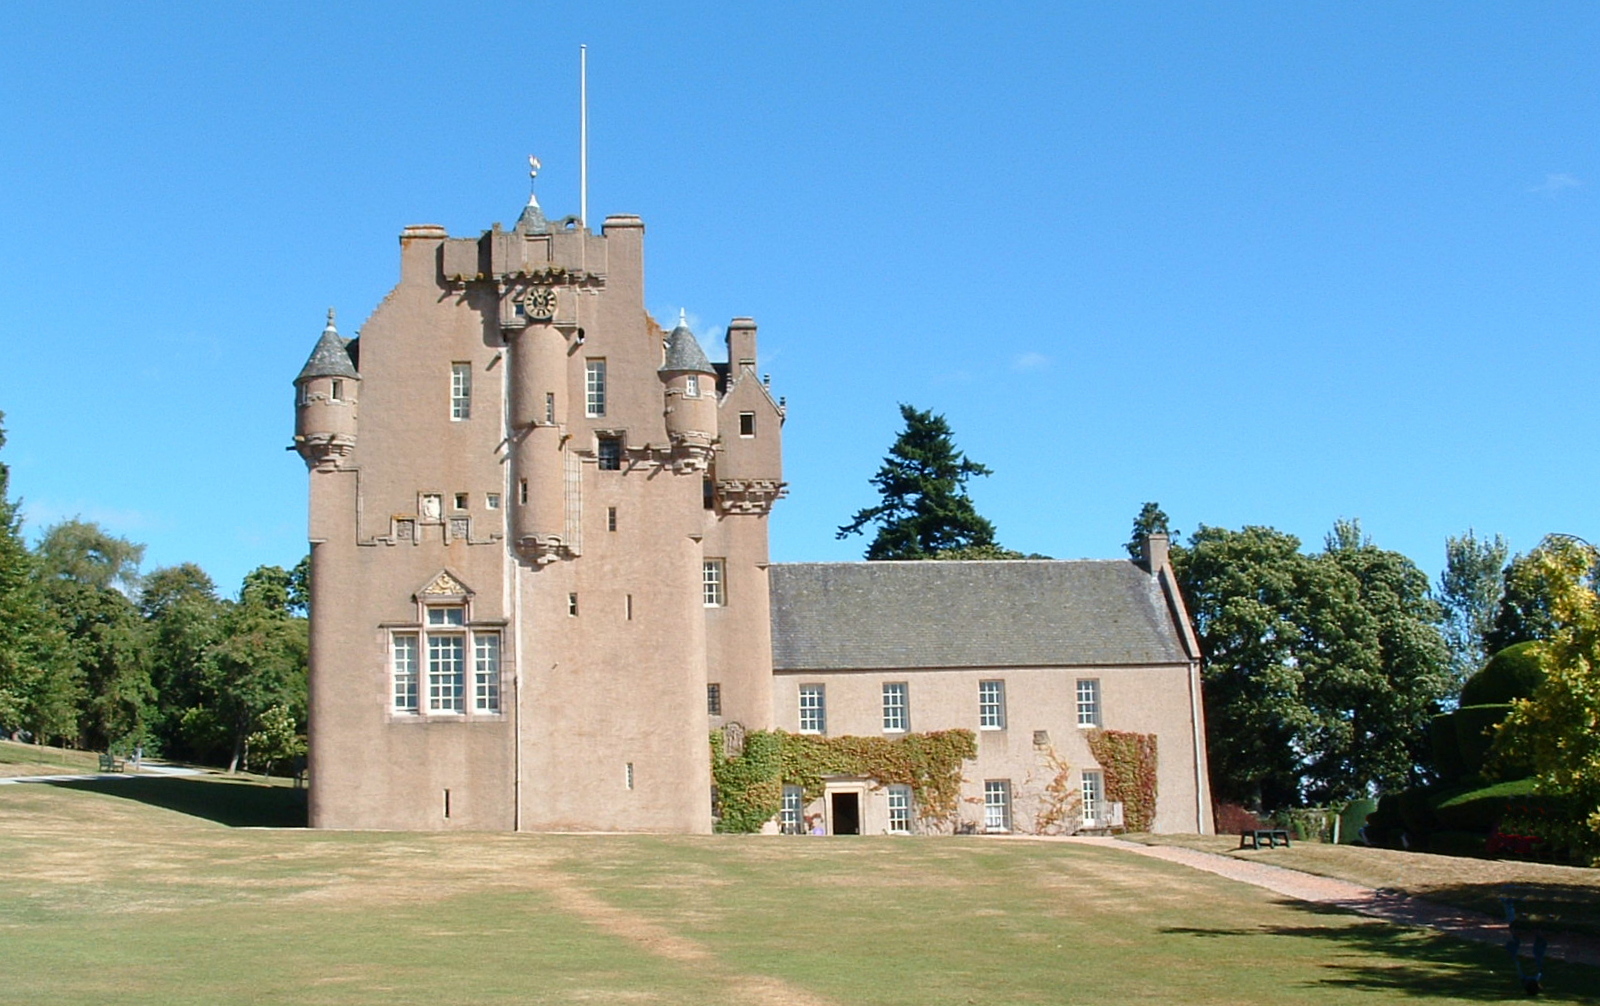 Crathes Castle is a Tower Castle with the later addition of living quarters. (2003)